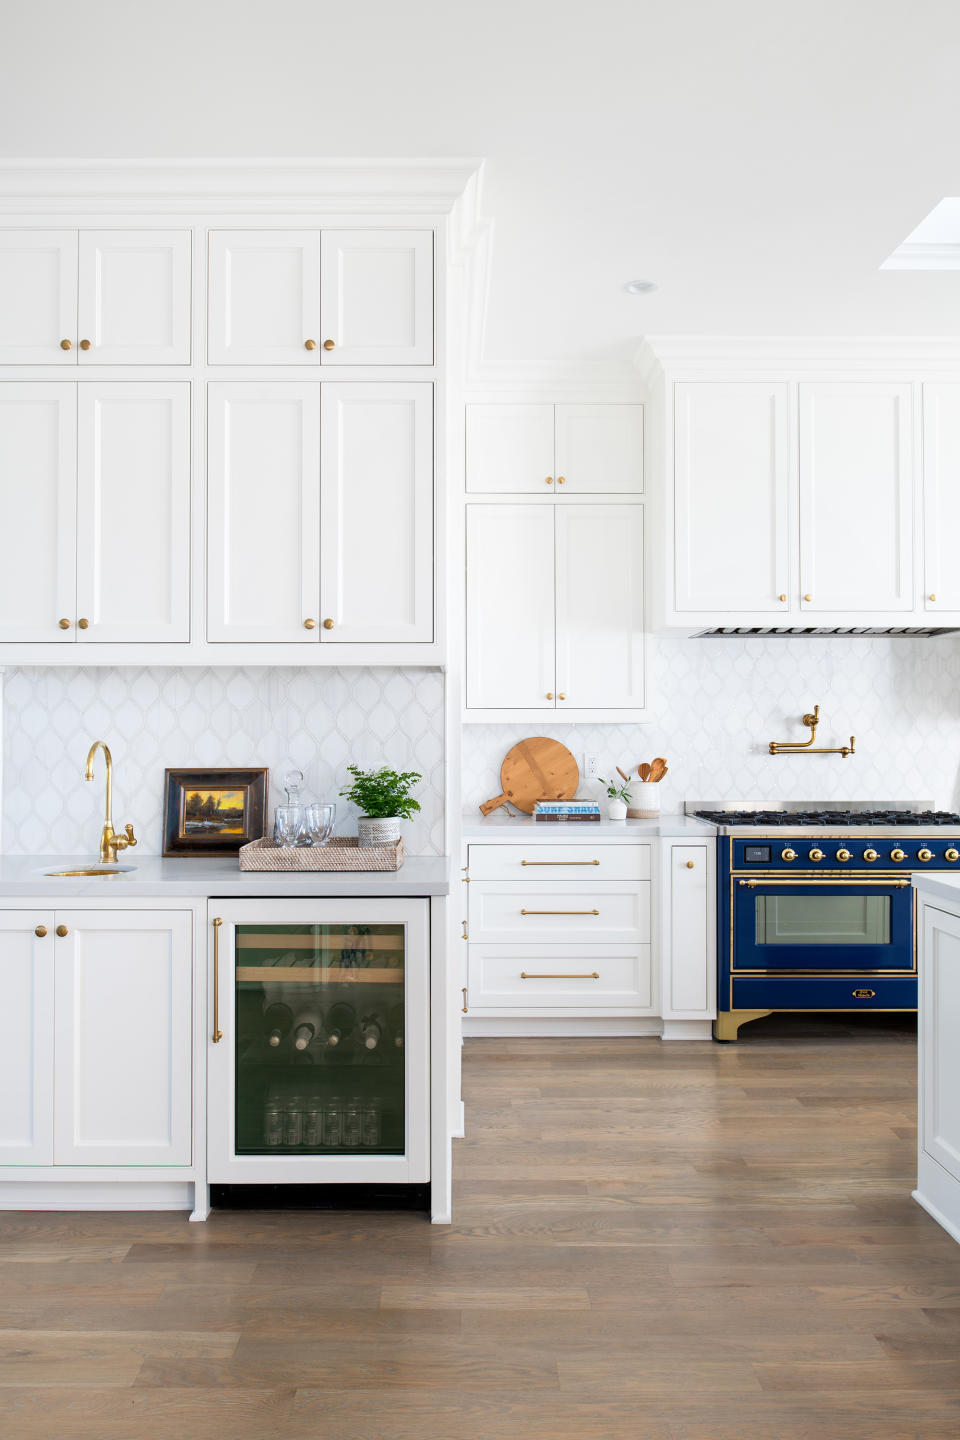 kitchen with white cabinetry, light wood flooring and navy blue iliv stove